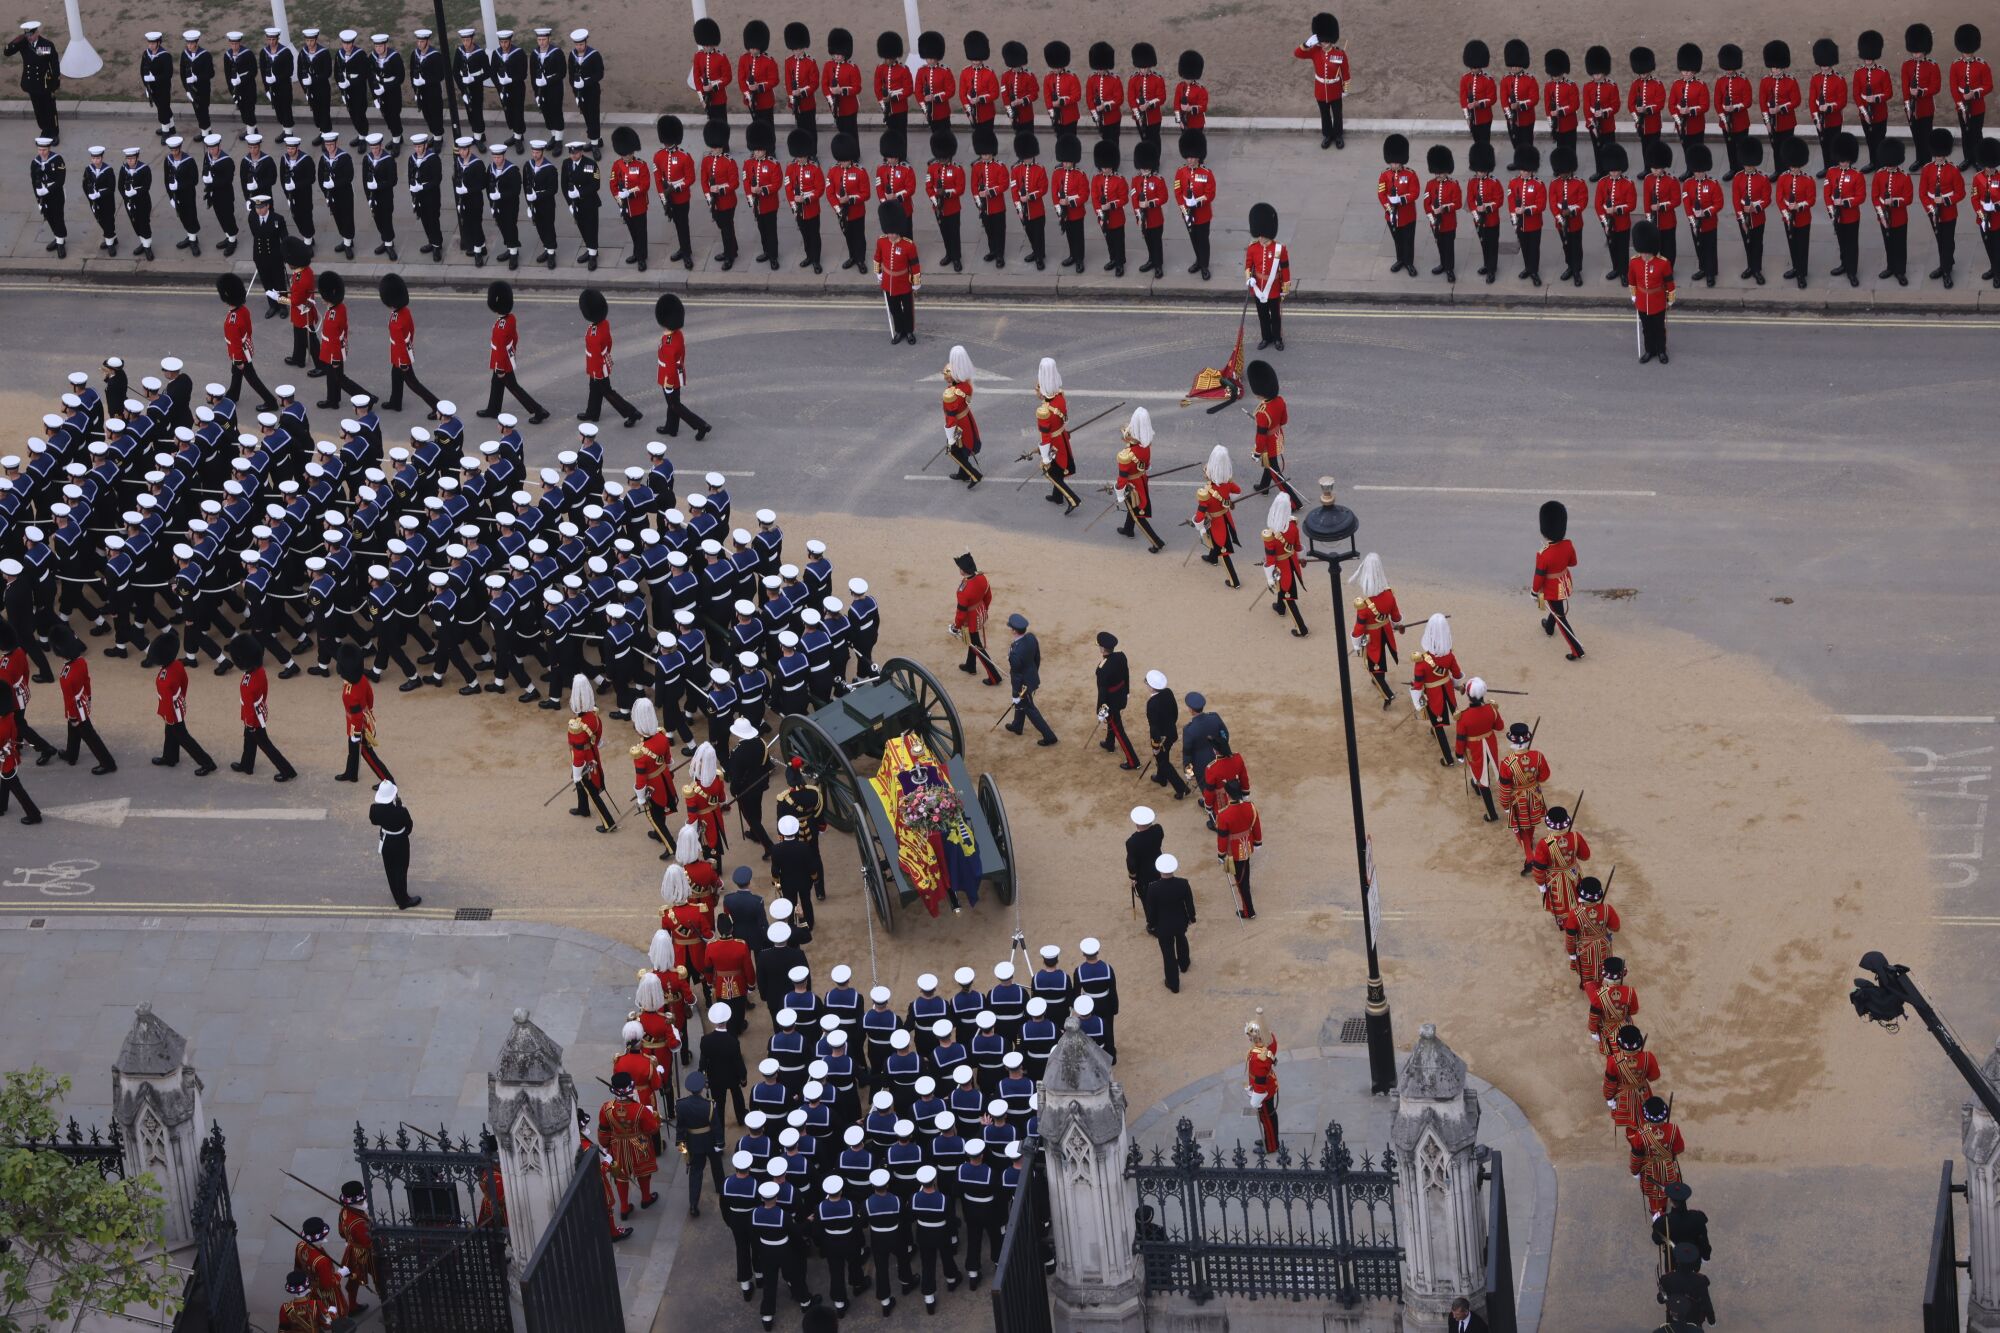 A wide view of the queen's coffin being escorted by troops.